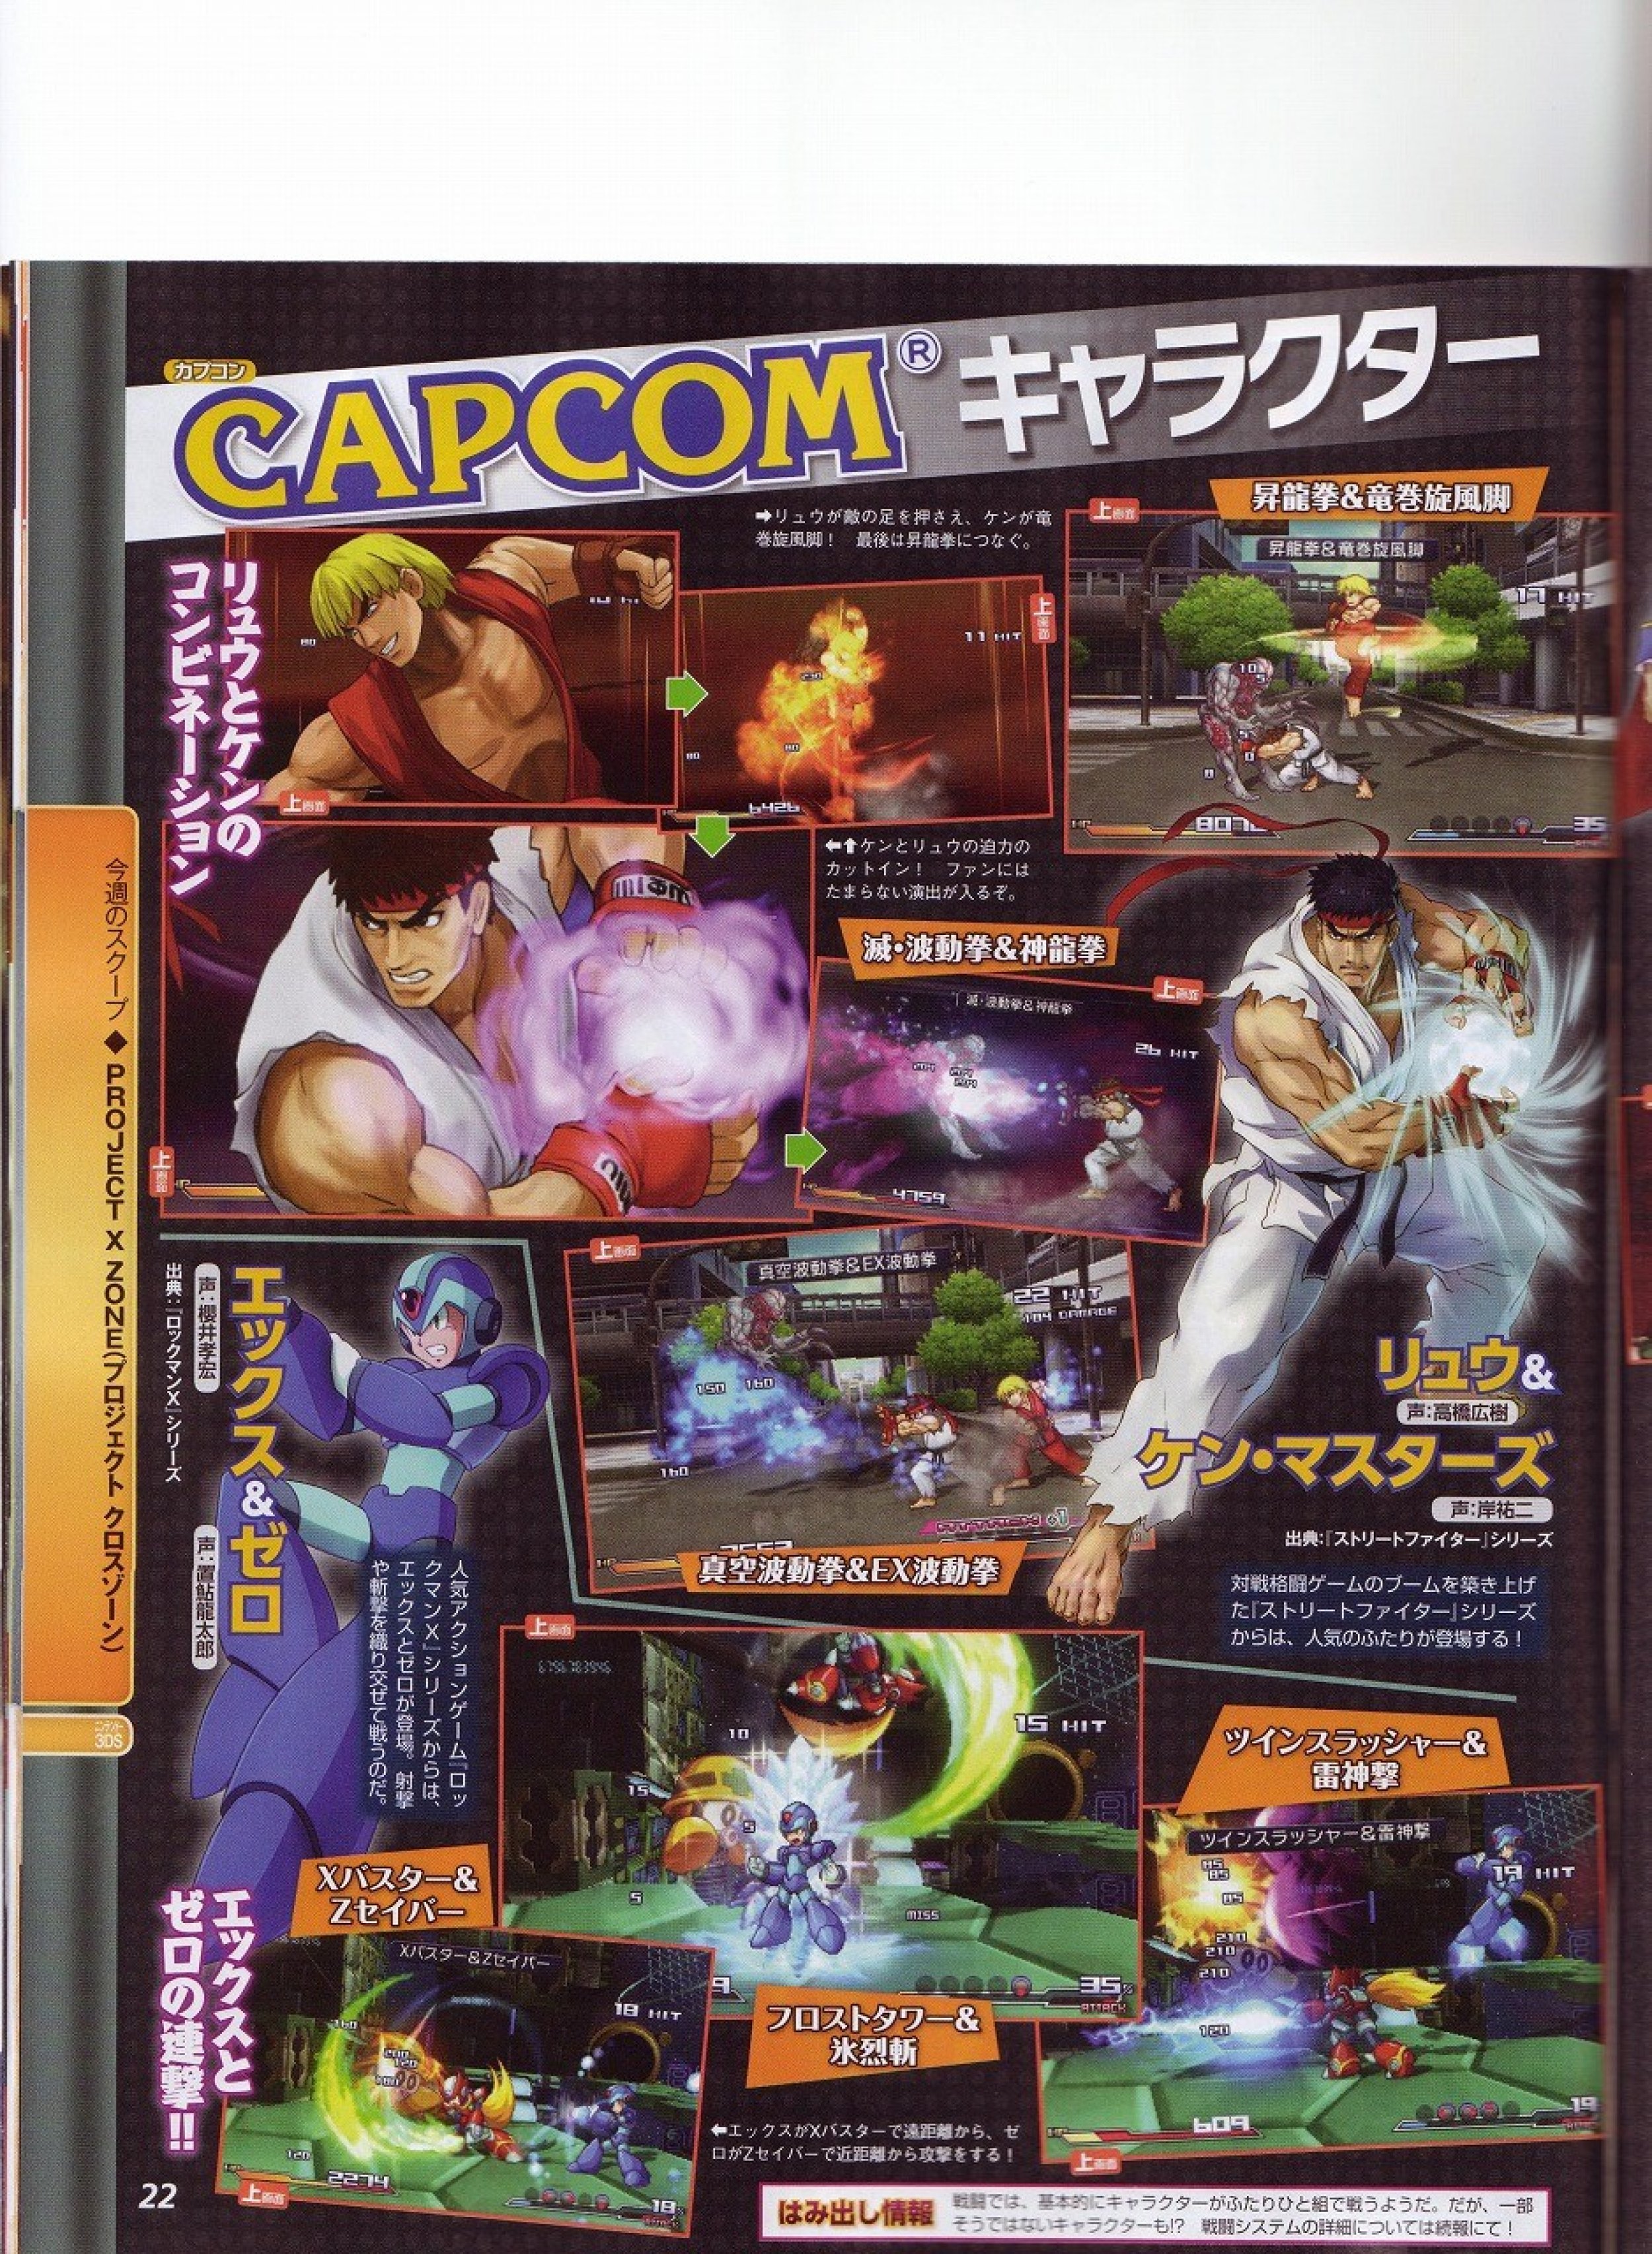 Project X Zone Release Date Capcom, Sega, Namco Crossover RPG Coming To 3DS PHOTOS